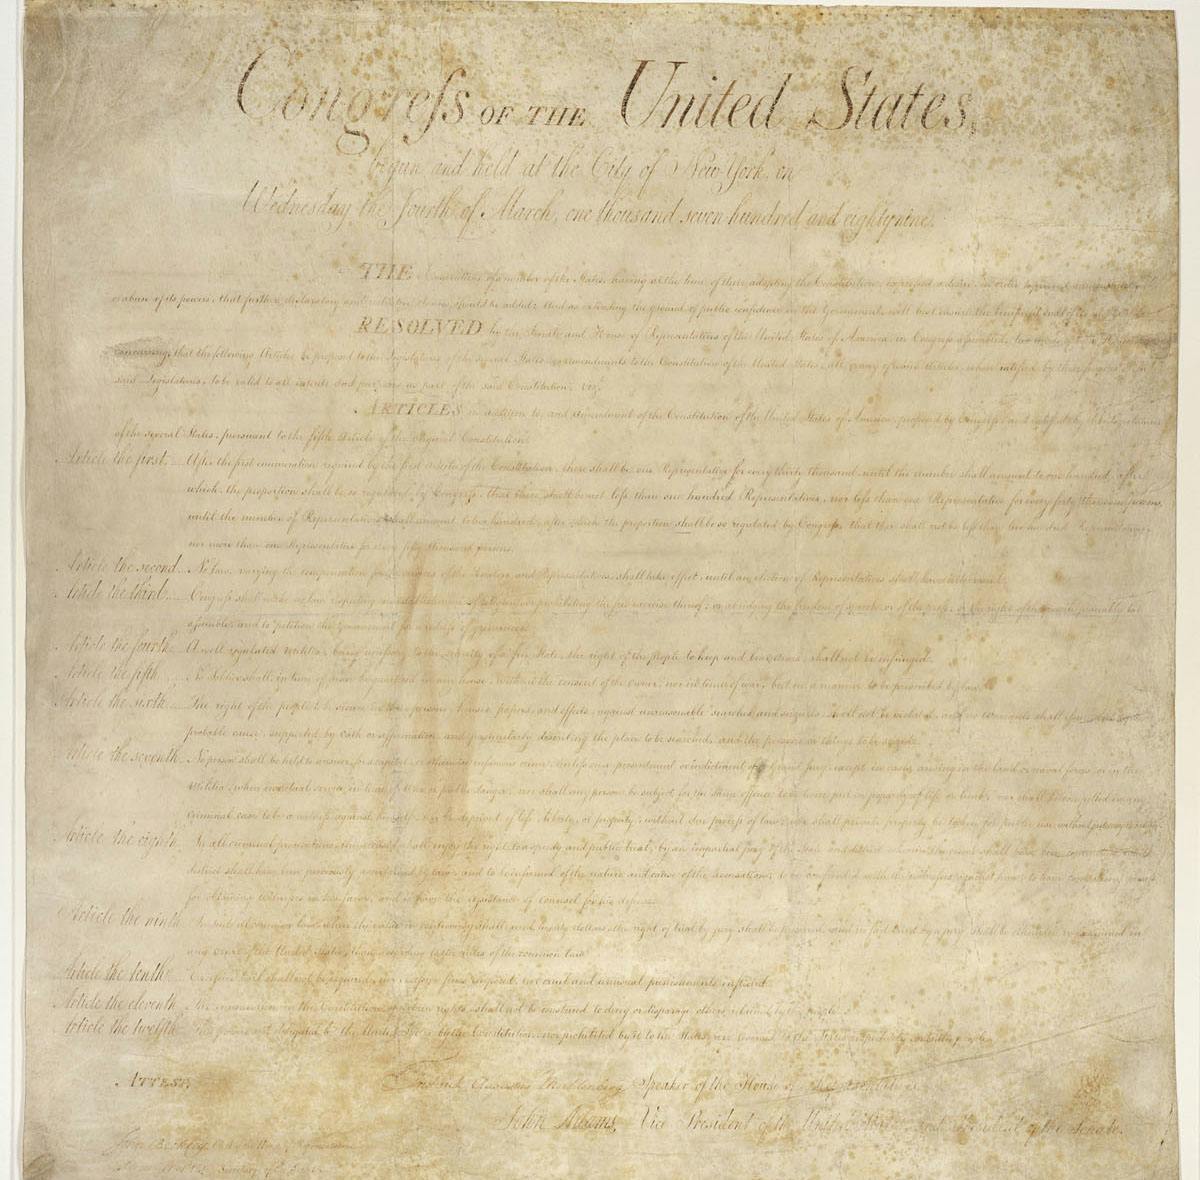 A photo from part of the original Bill of Rights document